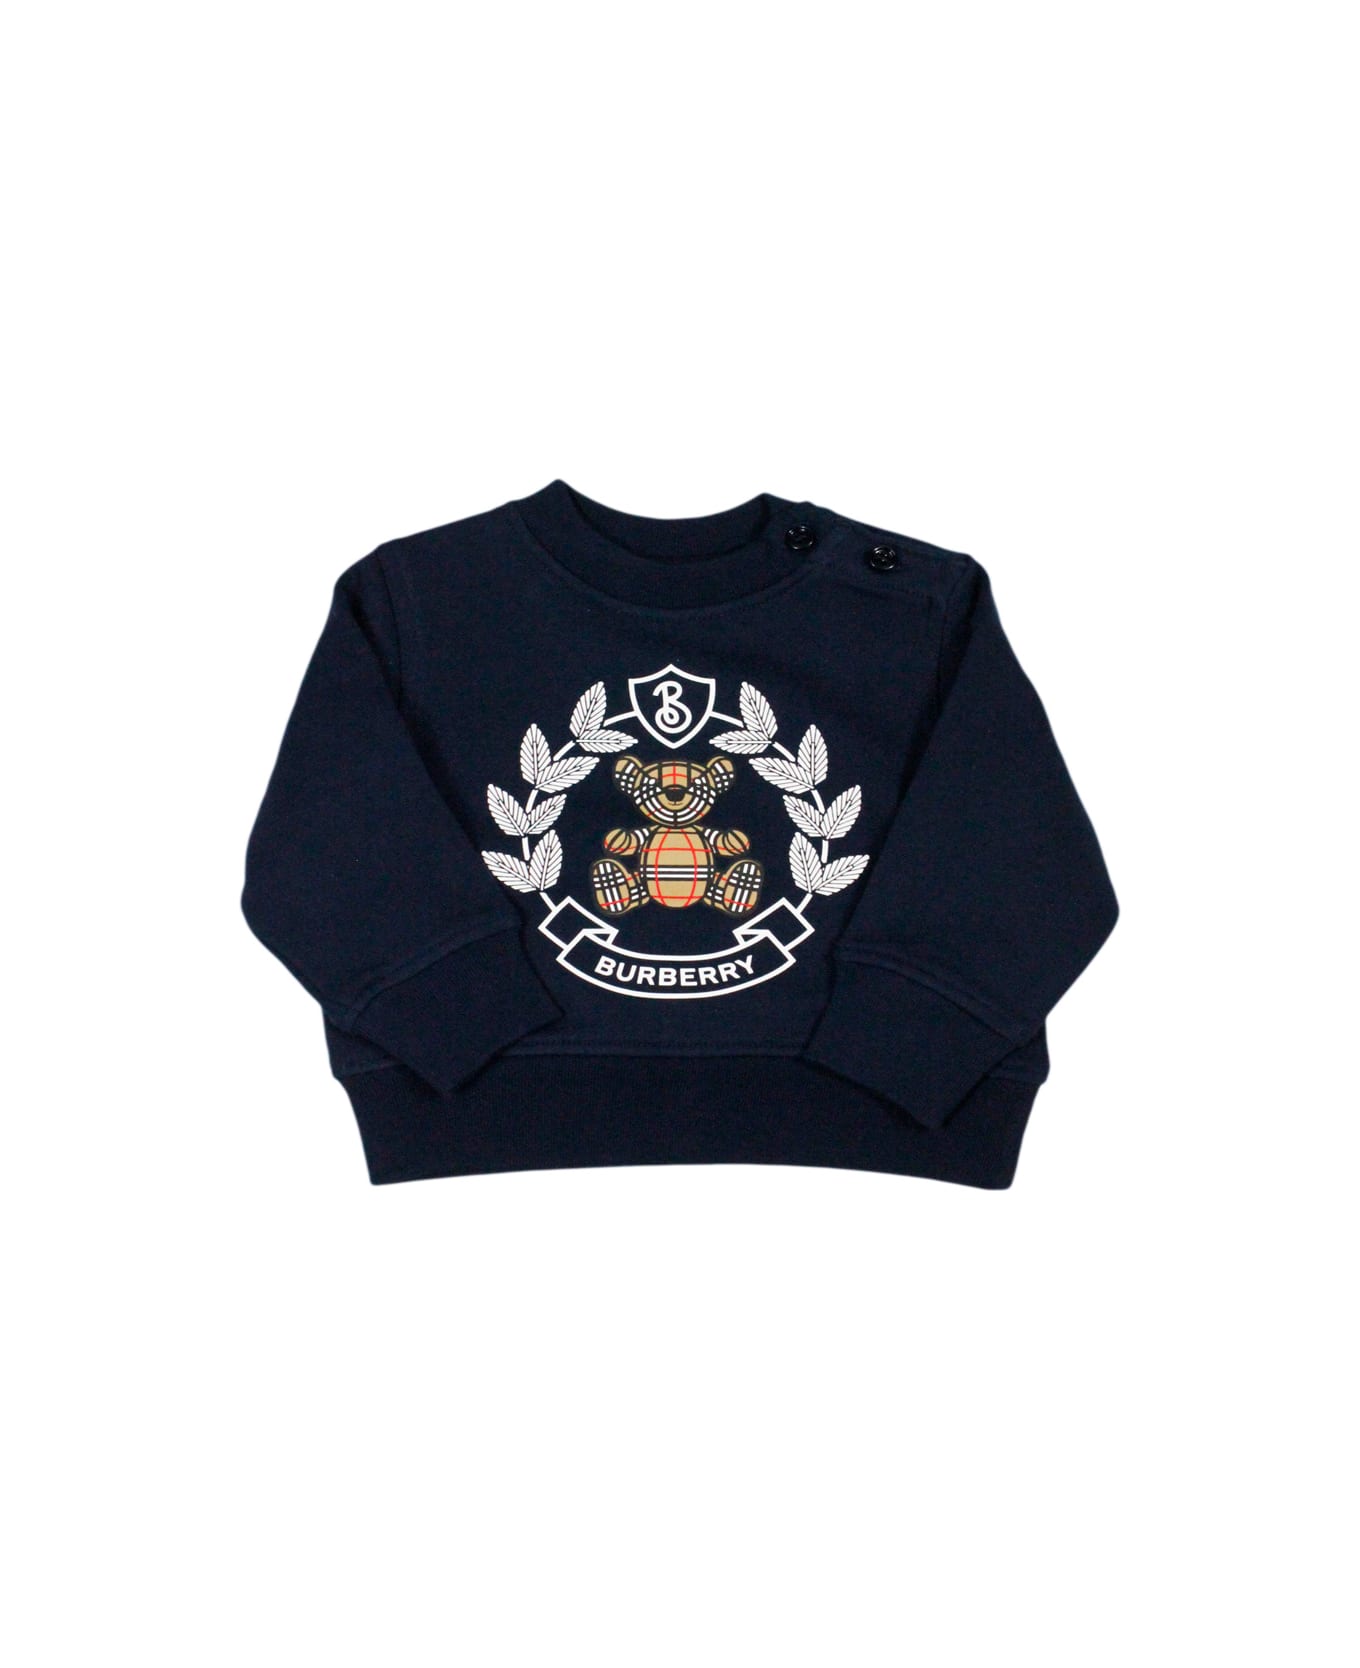 Burberry Crewneck Sweatshirt With Buttons On The Neck In Cotton Jersey With Classic Check Teddy Bear Print On The Front - Blu